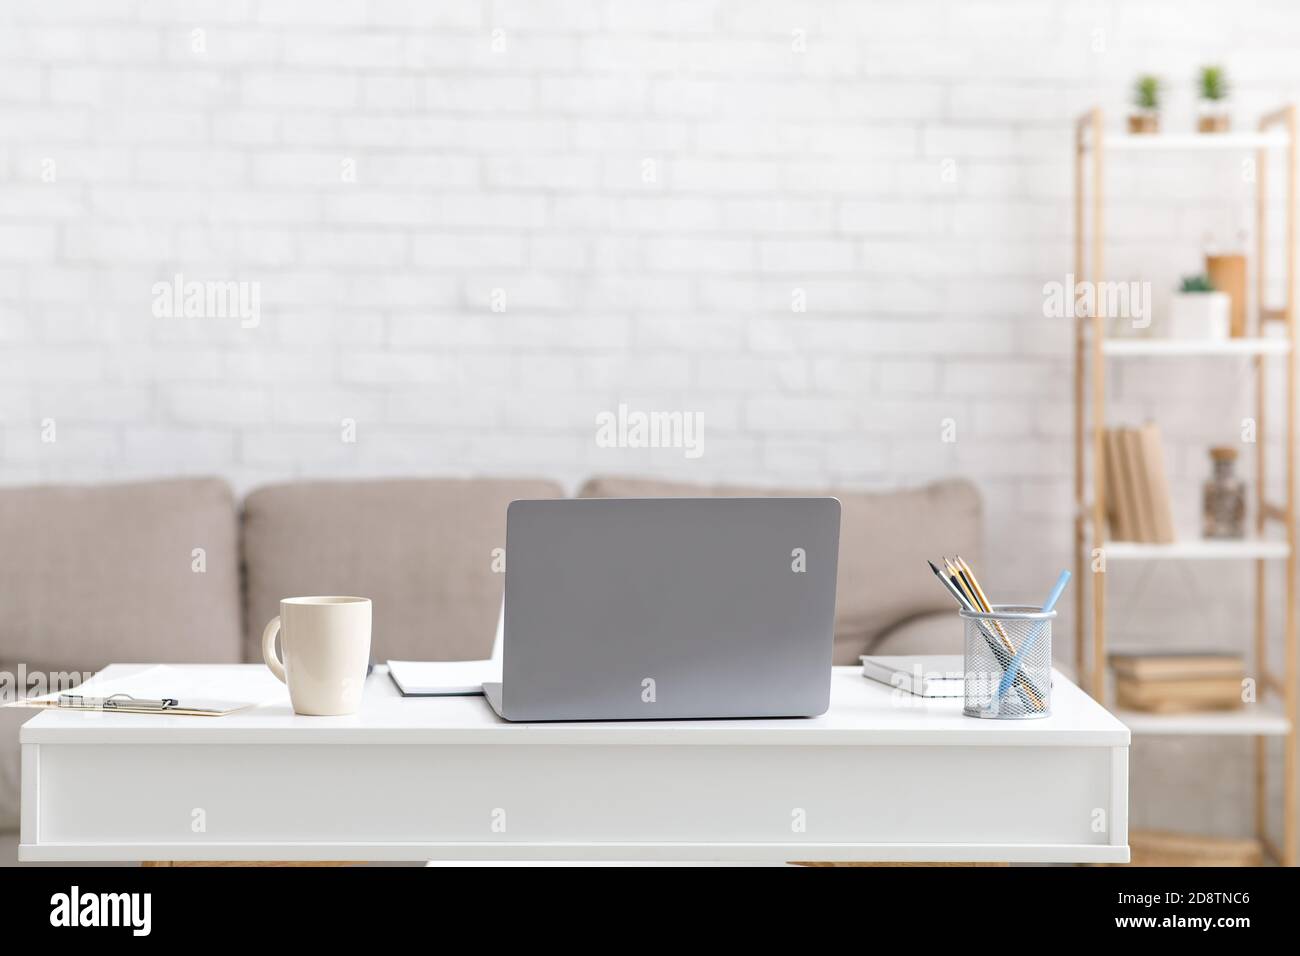 Focus on laptop on table with cup, notepads, pencils, near sofa and white brick wall of house Stock Photo